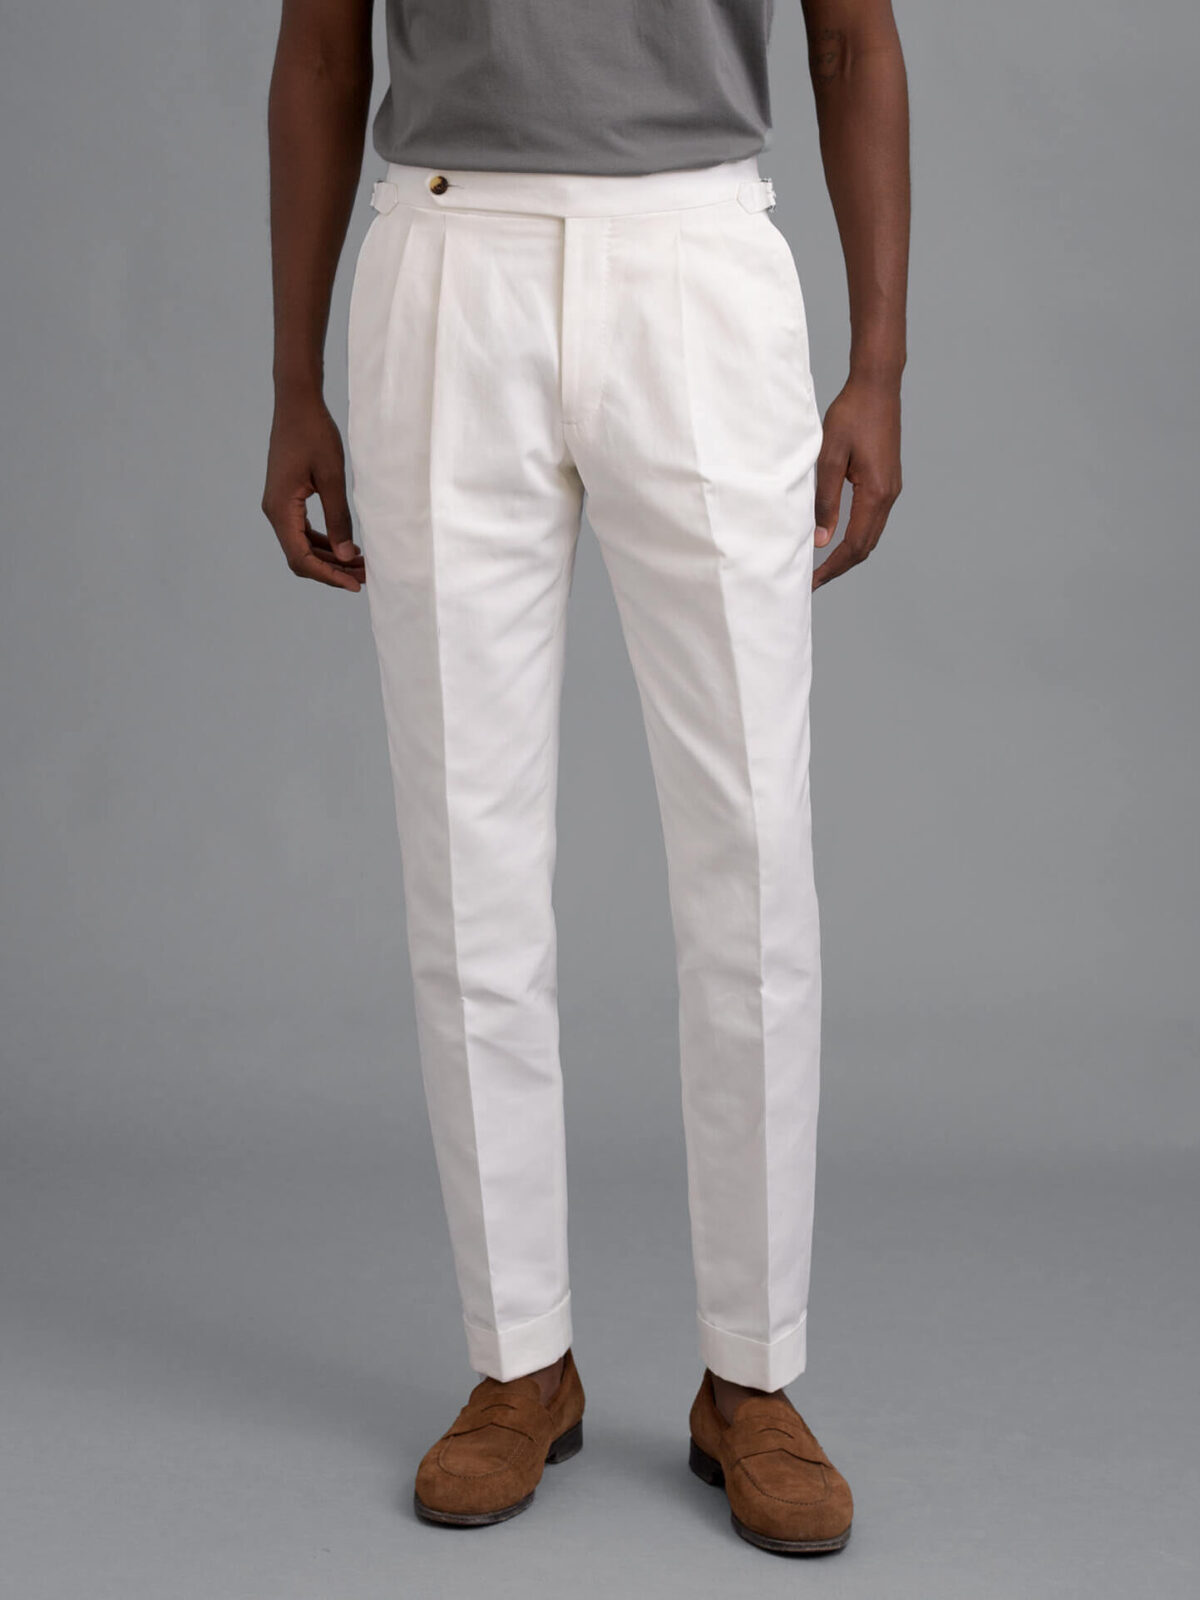 Double Pleated White Cotton and Linen Dress Pant